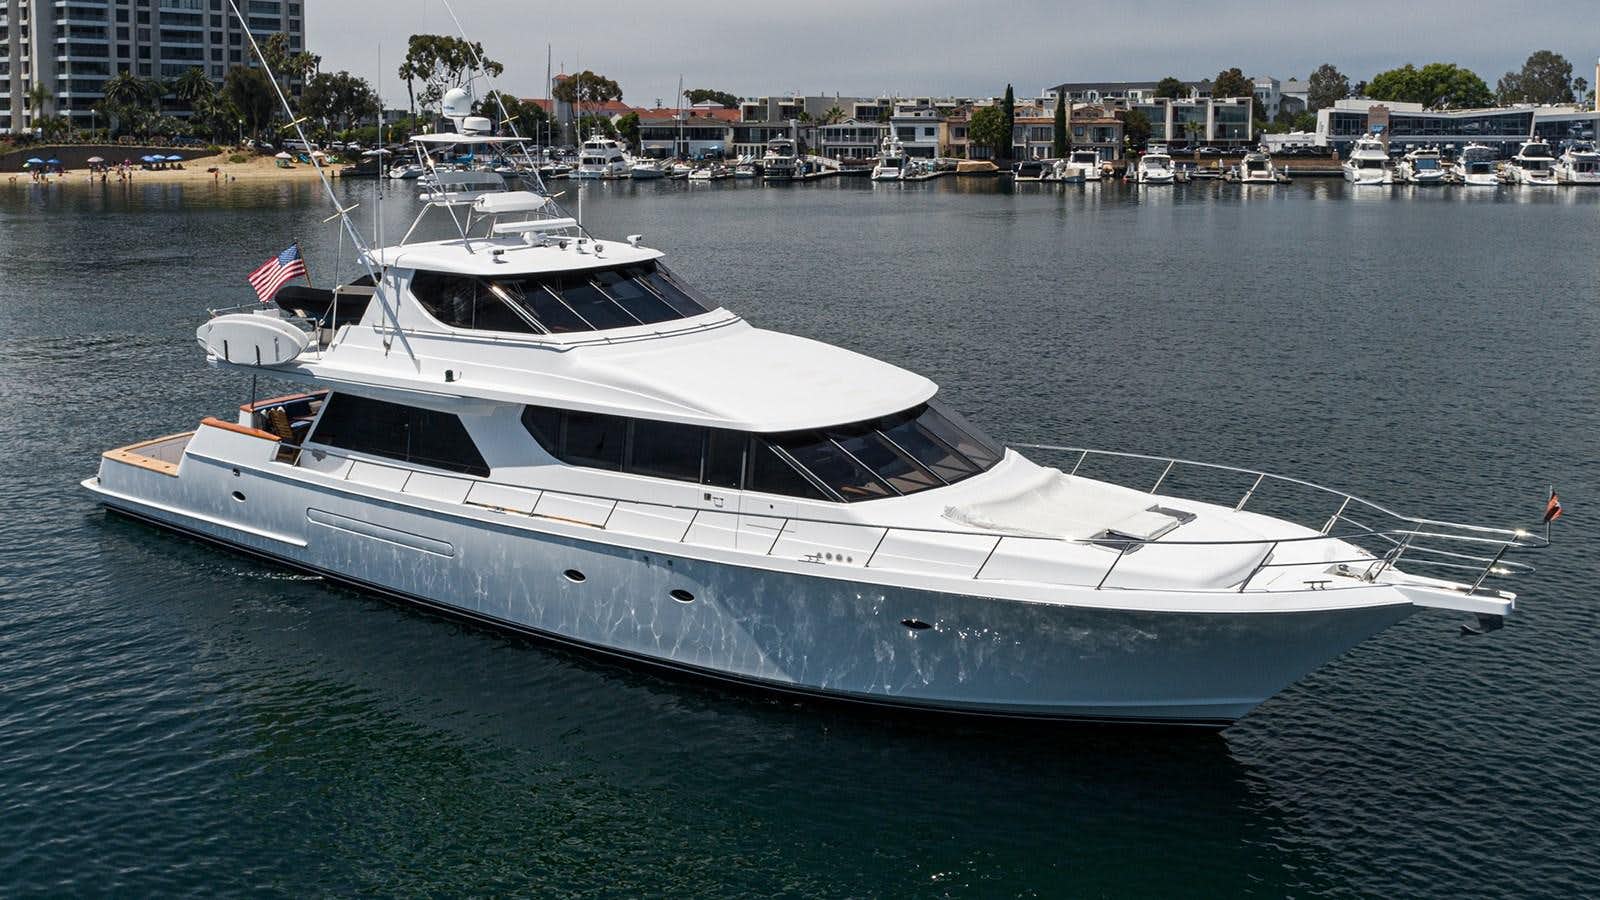 Watch Video for FAN TAIL Yacht for Sale